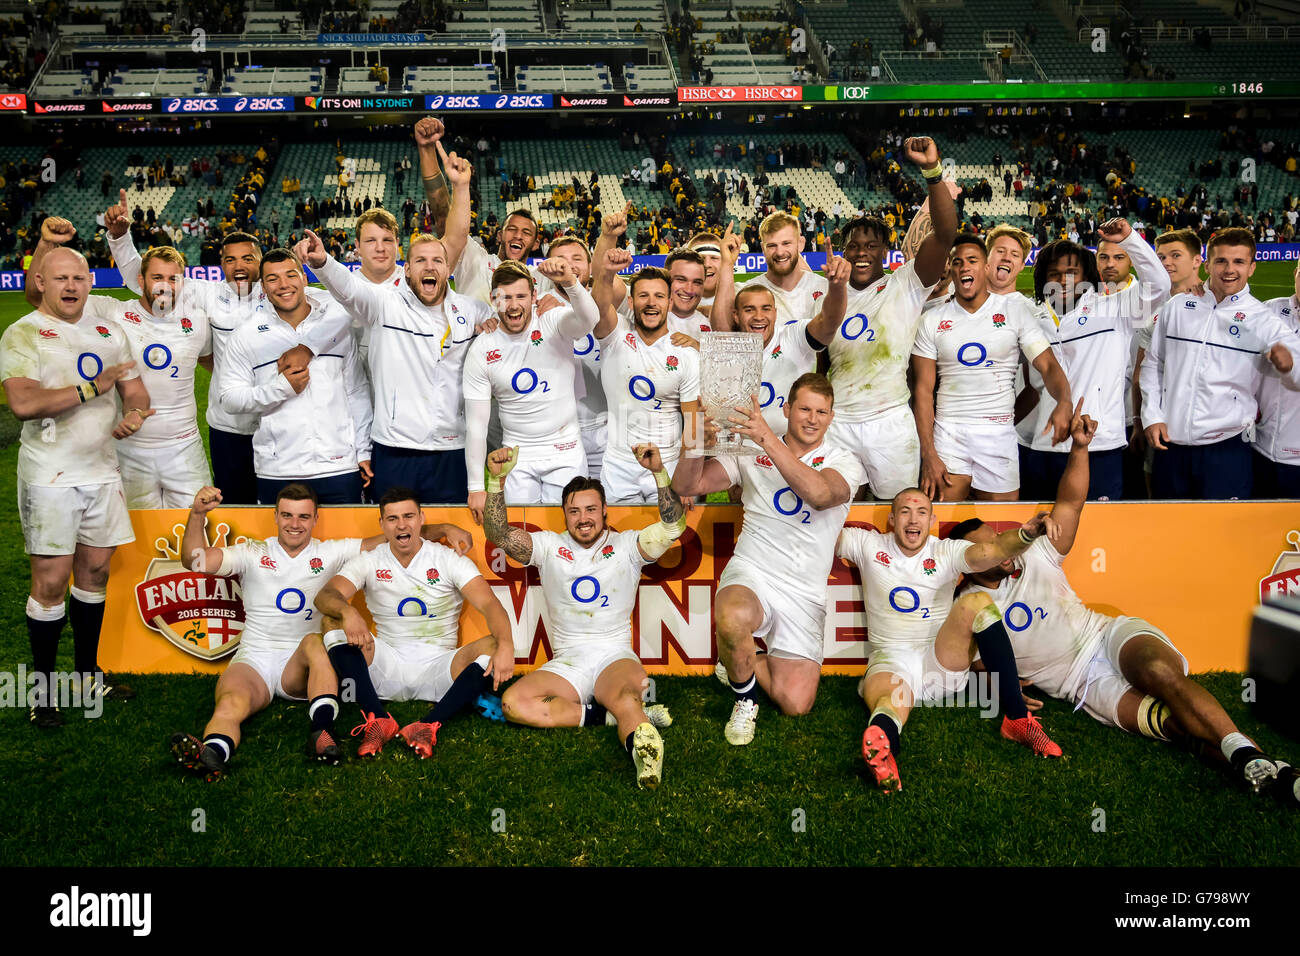 Sydney, Australia. 25 June, 2016. The English rugby team celebrate victory  over Australia in the third and final rugby union Test match. England won  the final match 44-40 at Allianz Stadium and